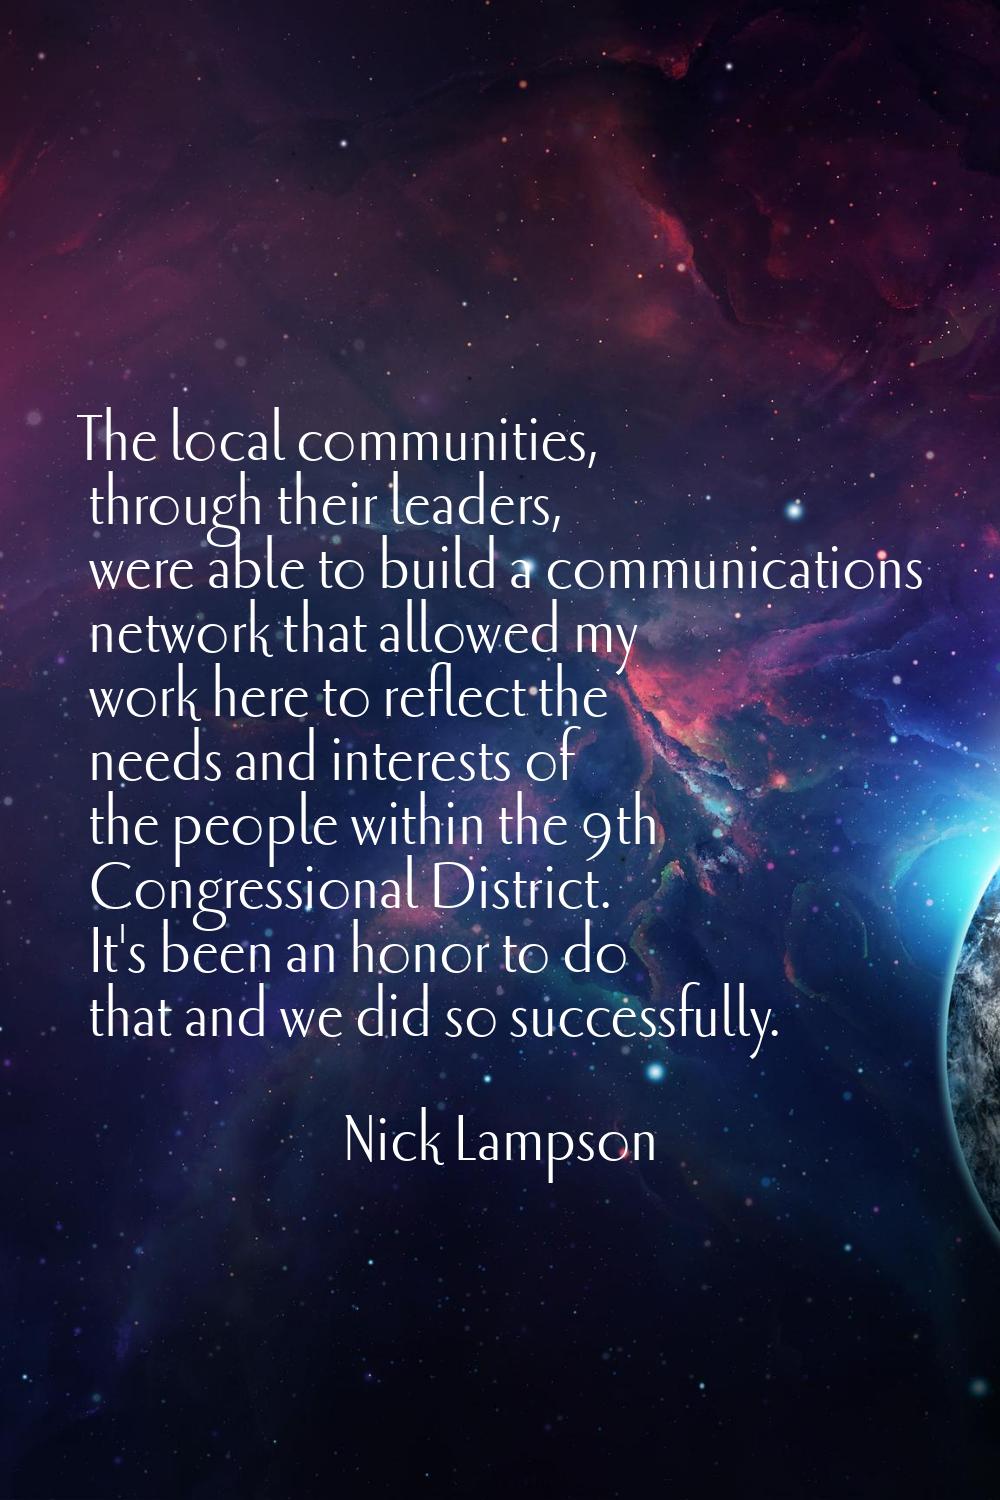 The local communities, through their leaders, were able to build a communications network that allo